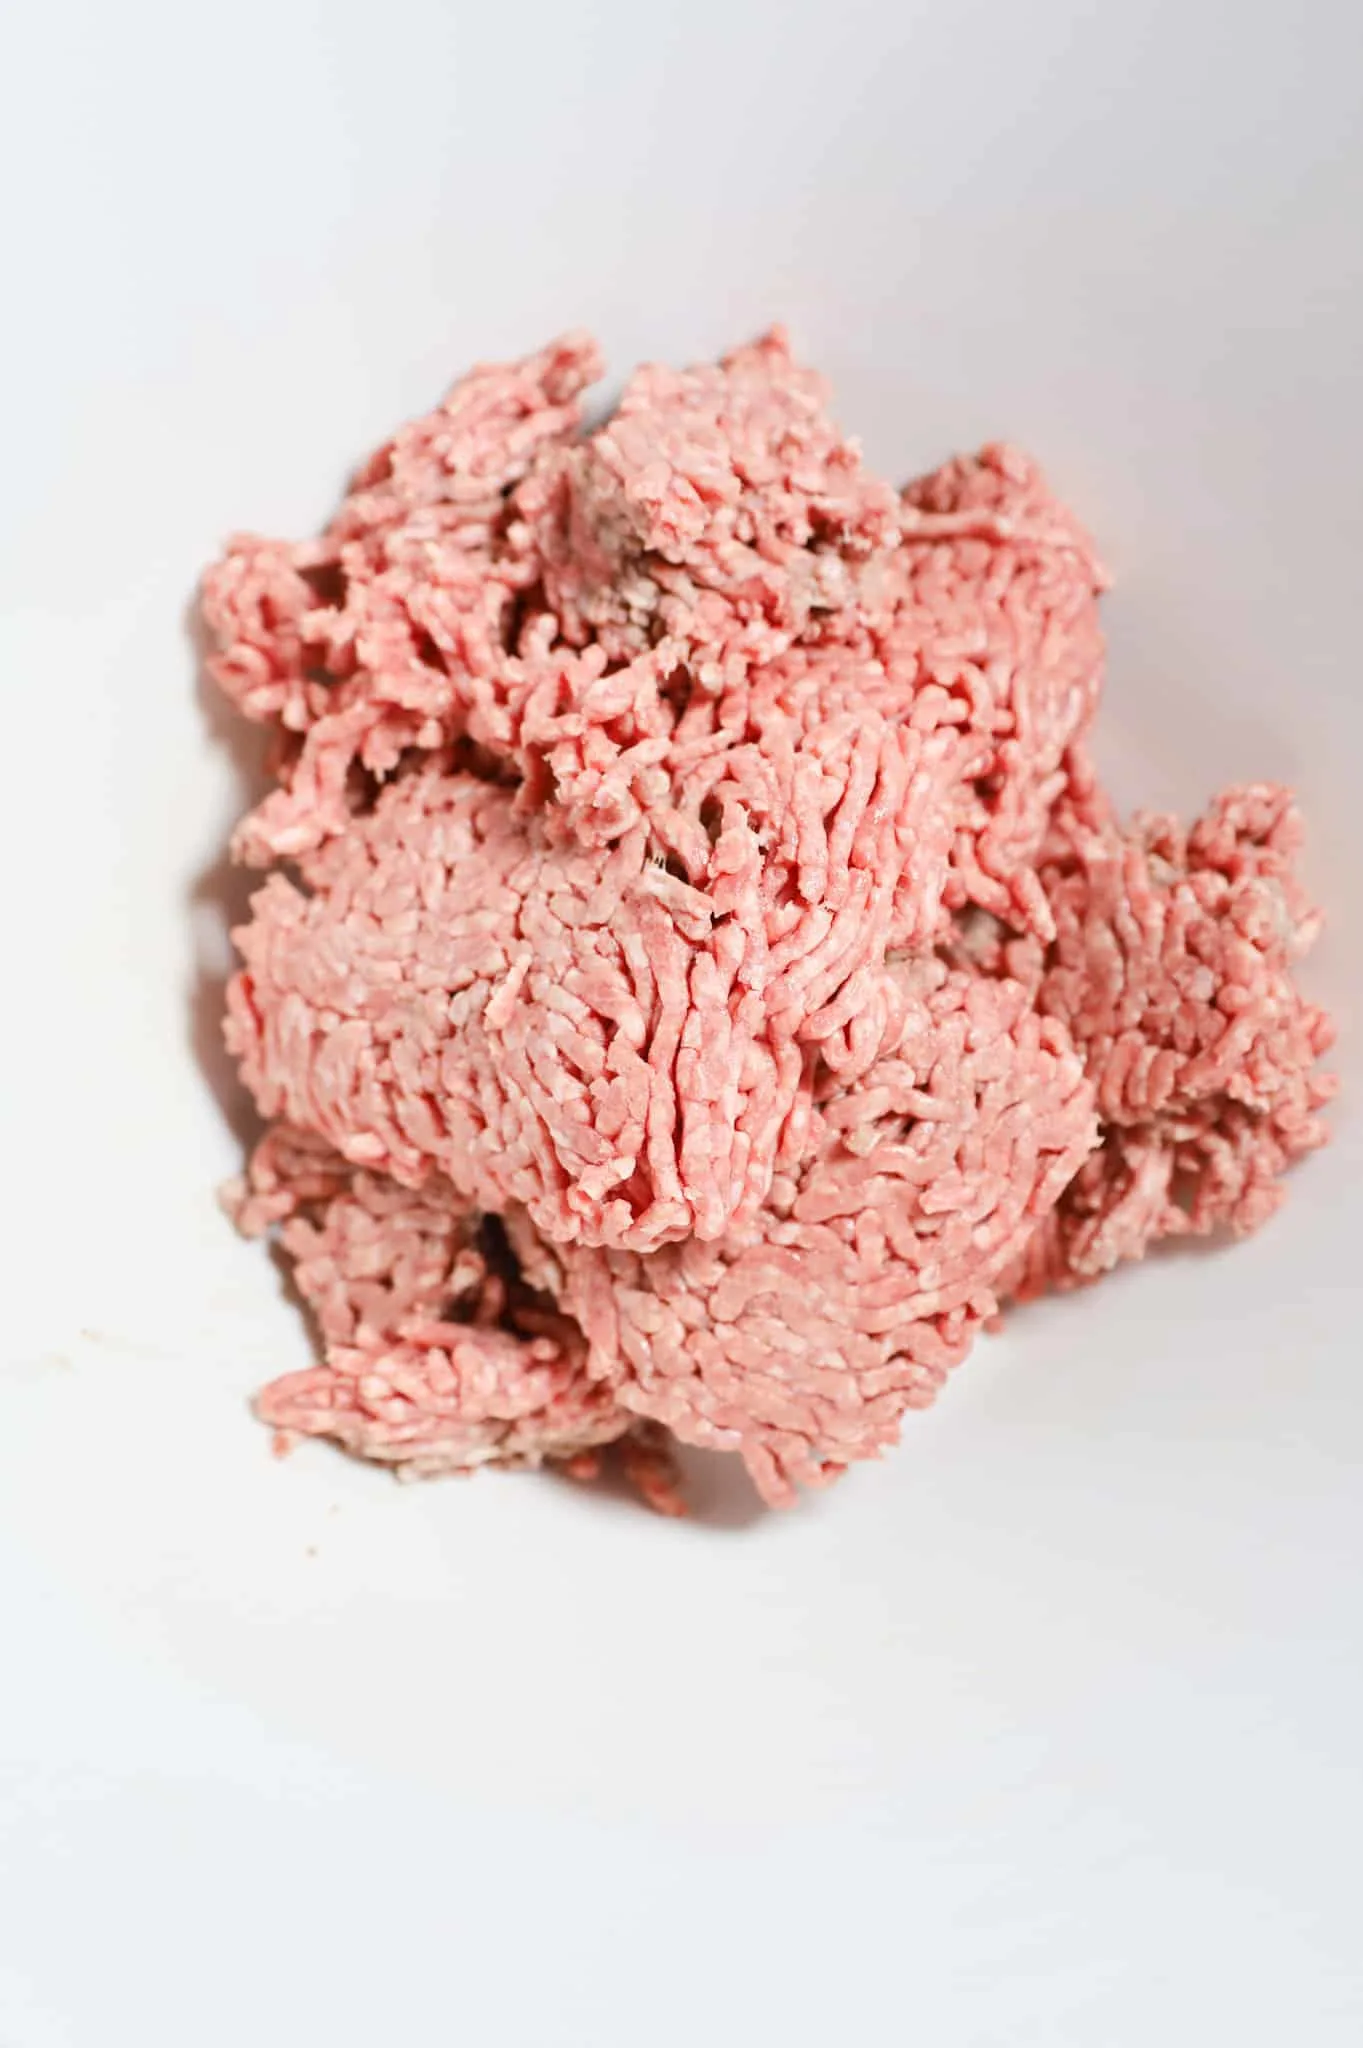 raw ground beef in a mixing bowl